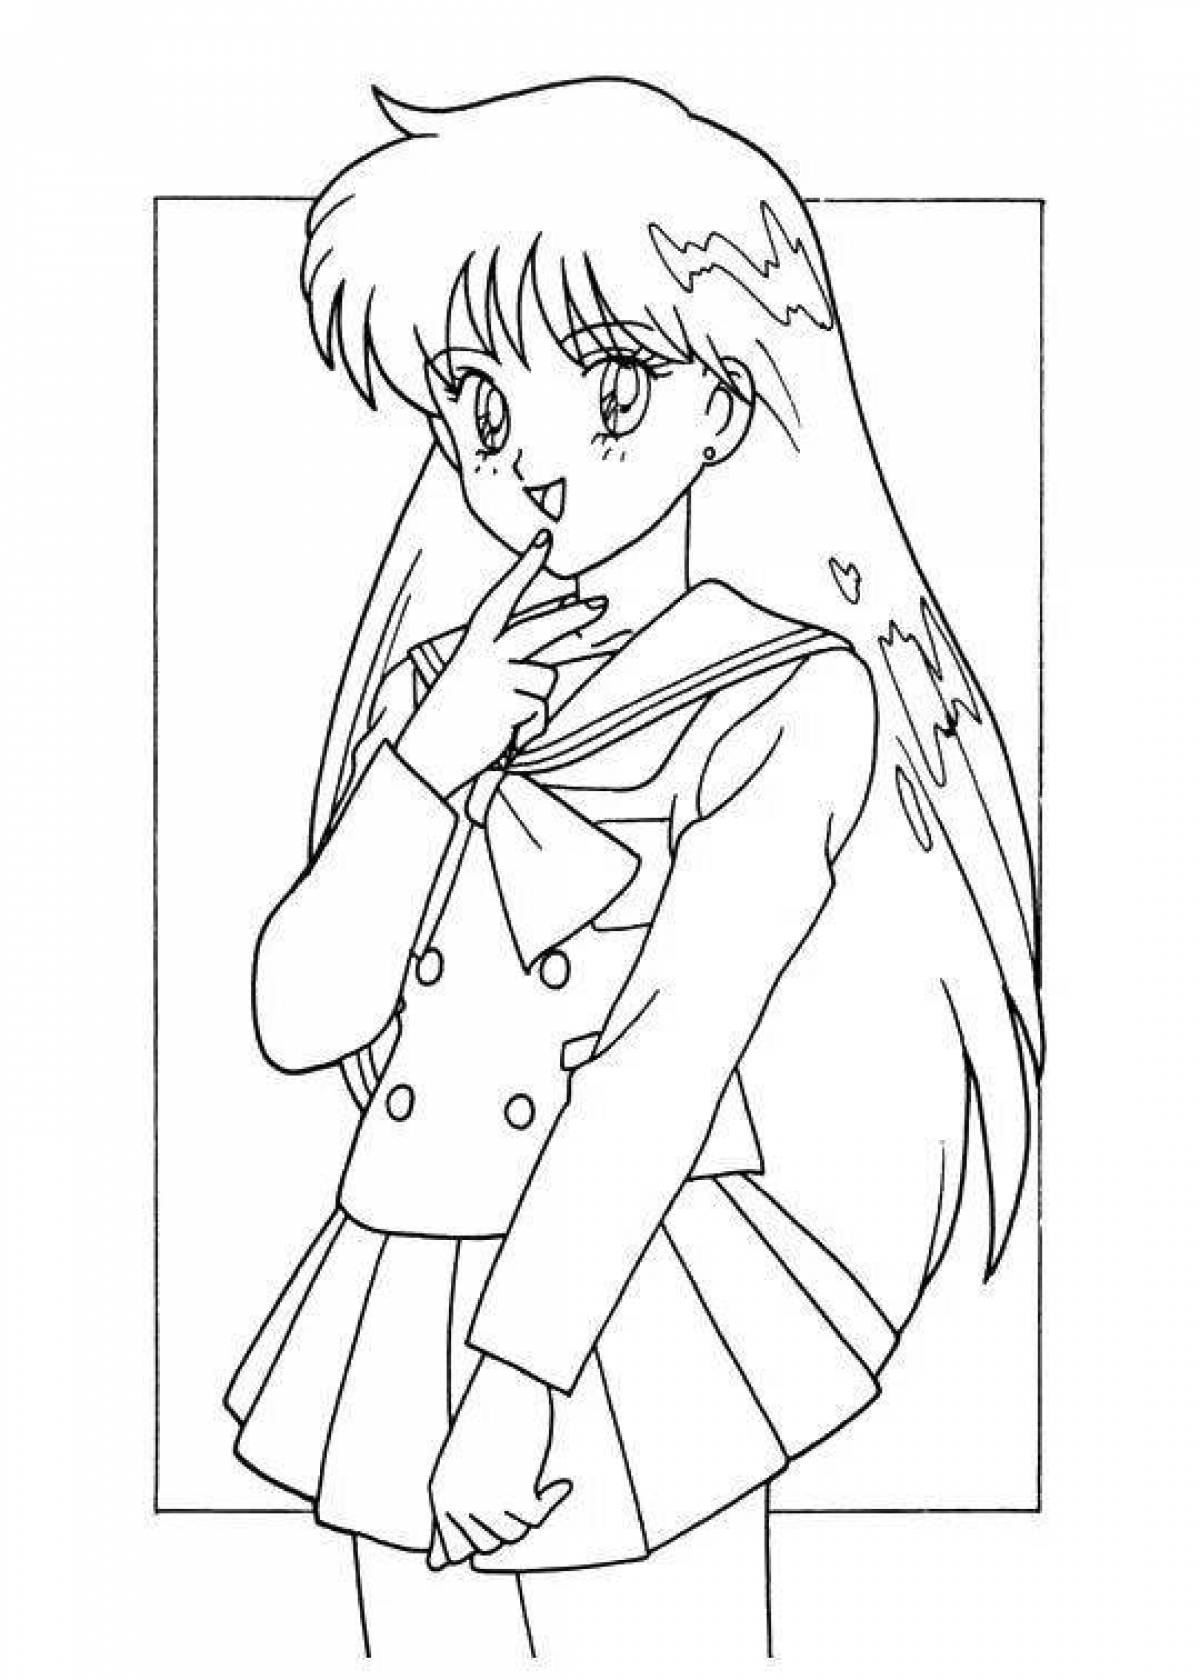 Colorful teenage anime coloring book